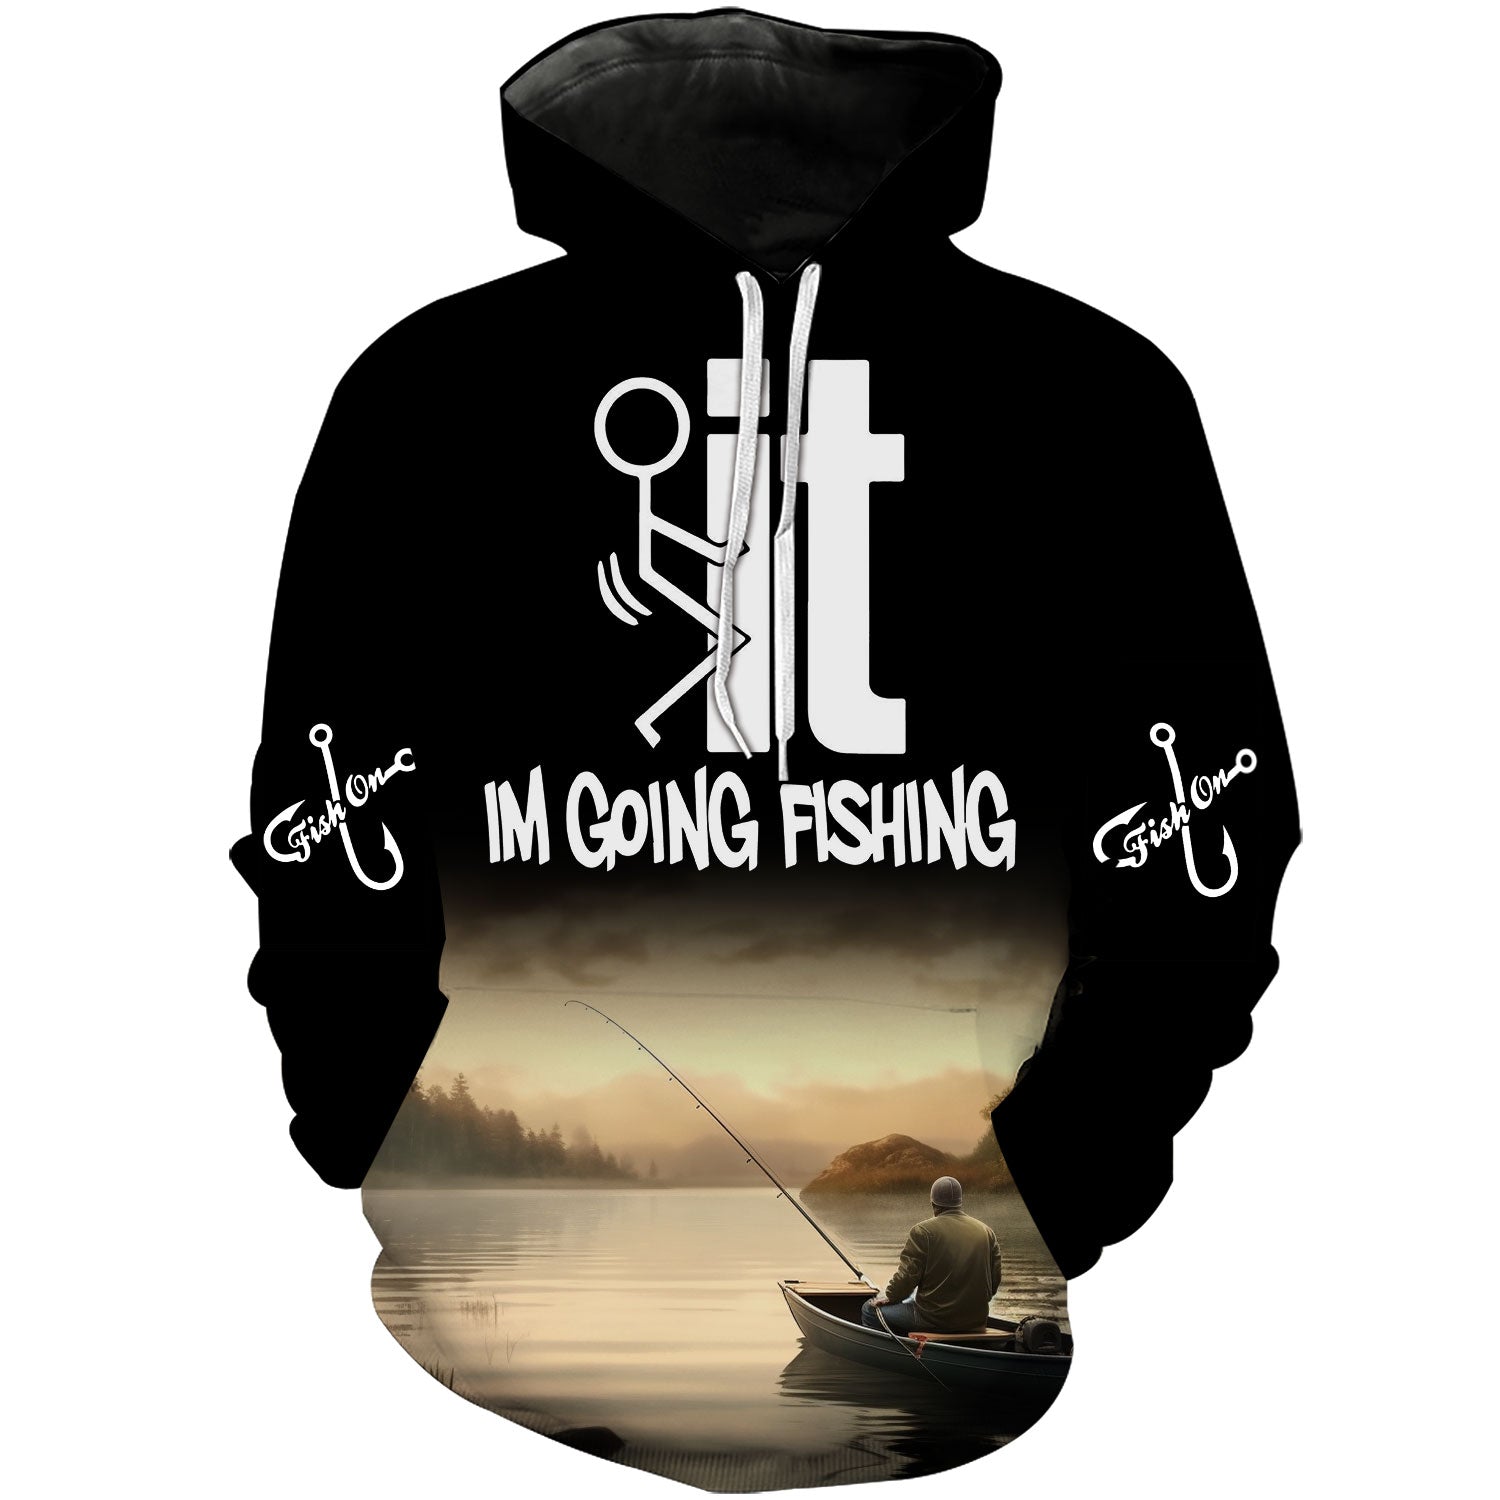 I am going Fishing hoodie for Men - Adventure-themed hoodie